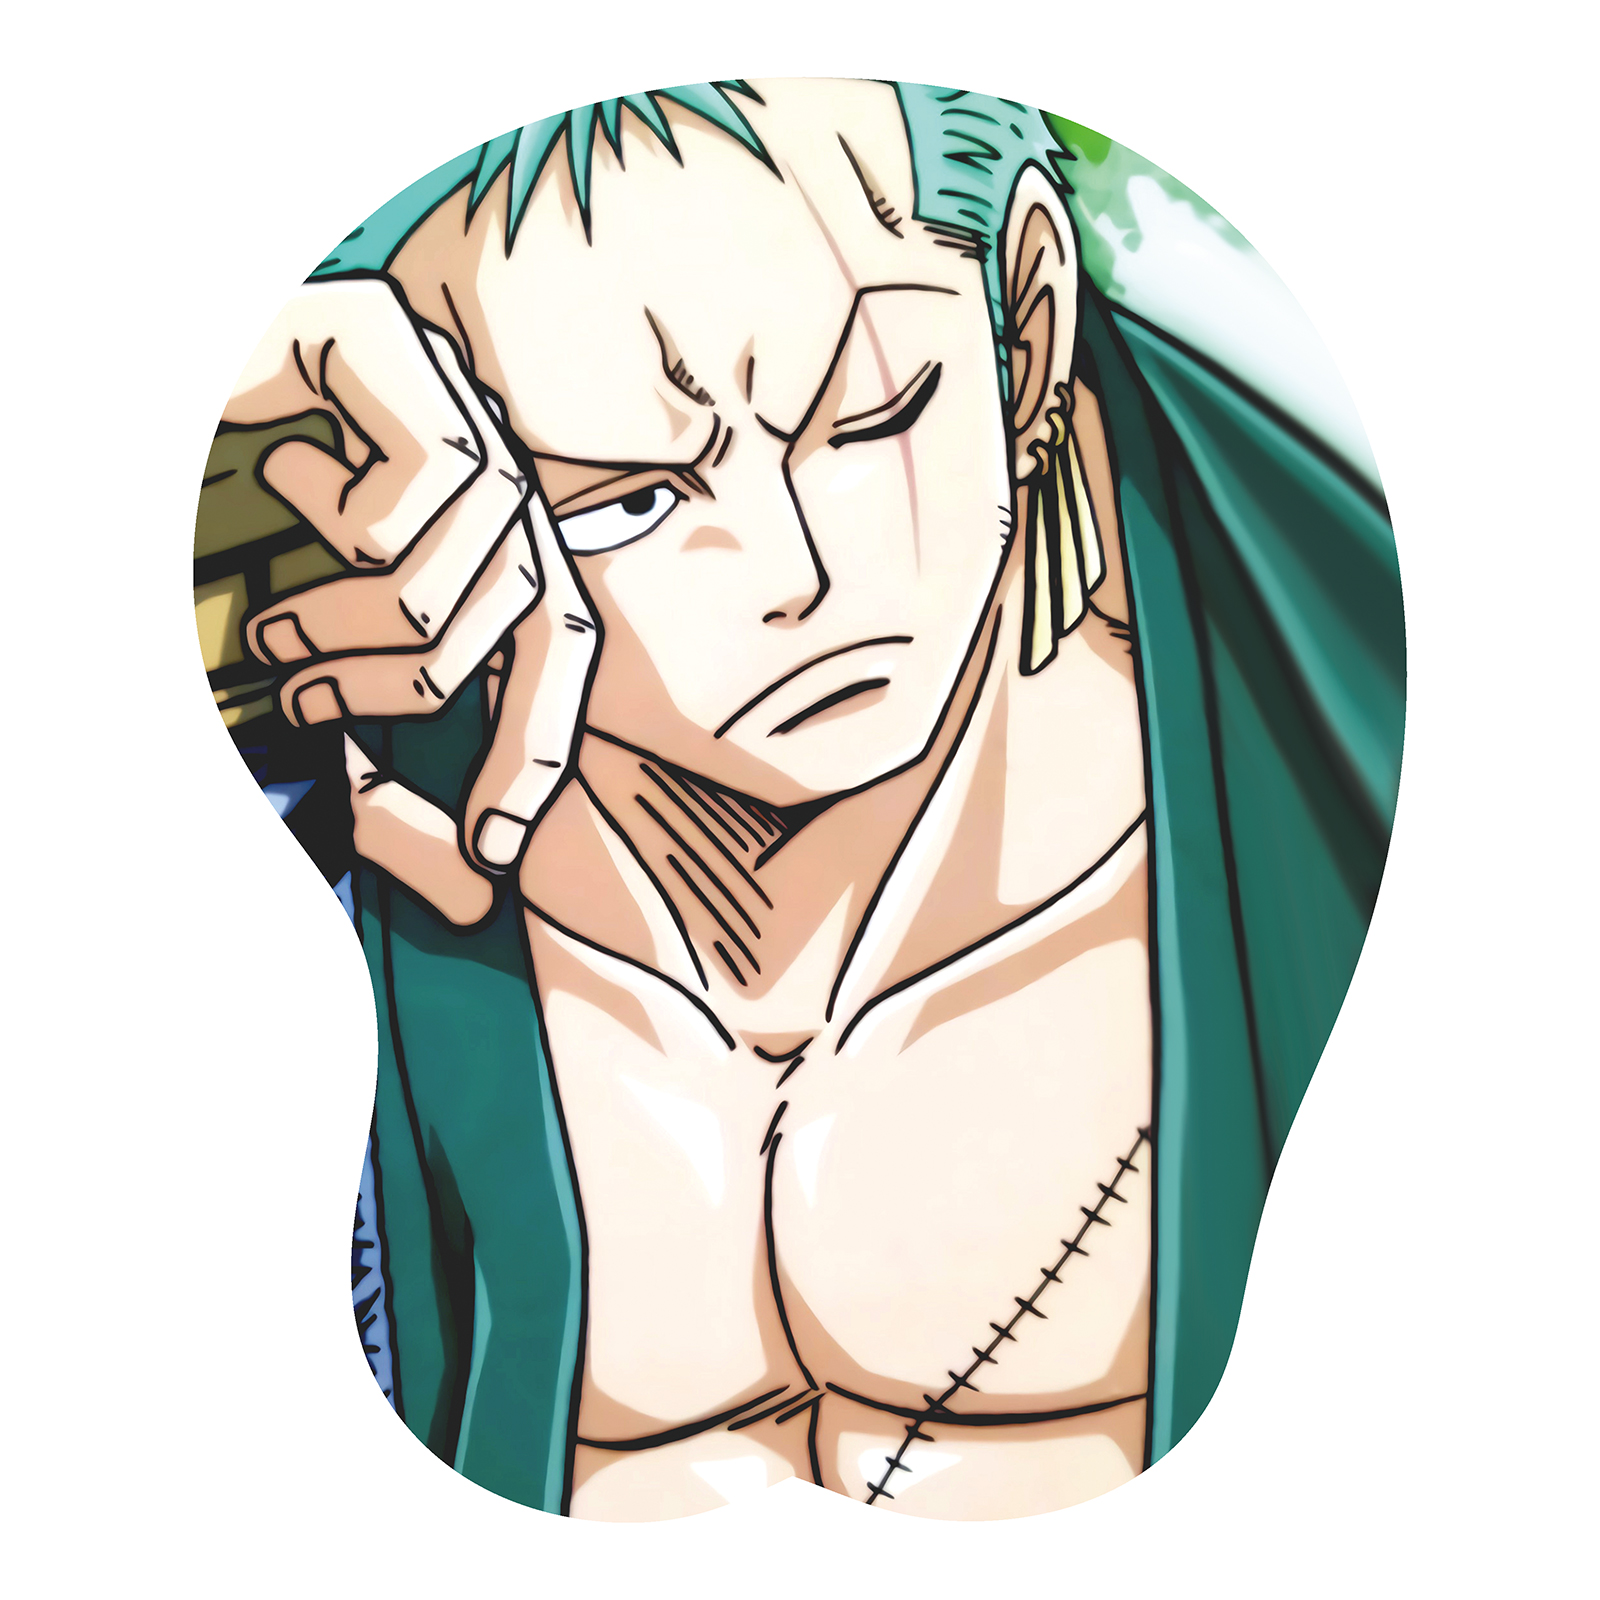 Roronoa Zoro One Piece Anime 3D Mouse Pads Soft Breast Sexy Butt Wrist Rest Oppai